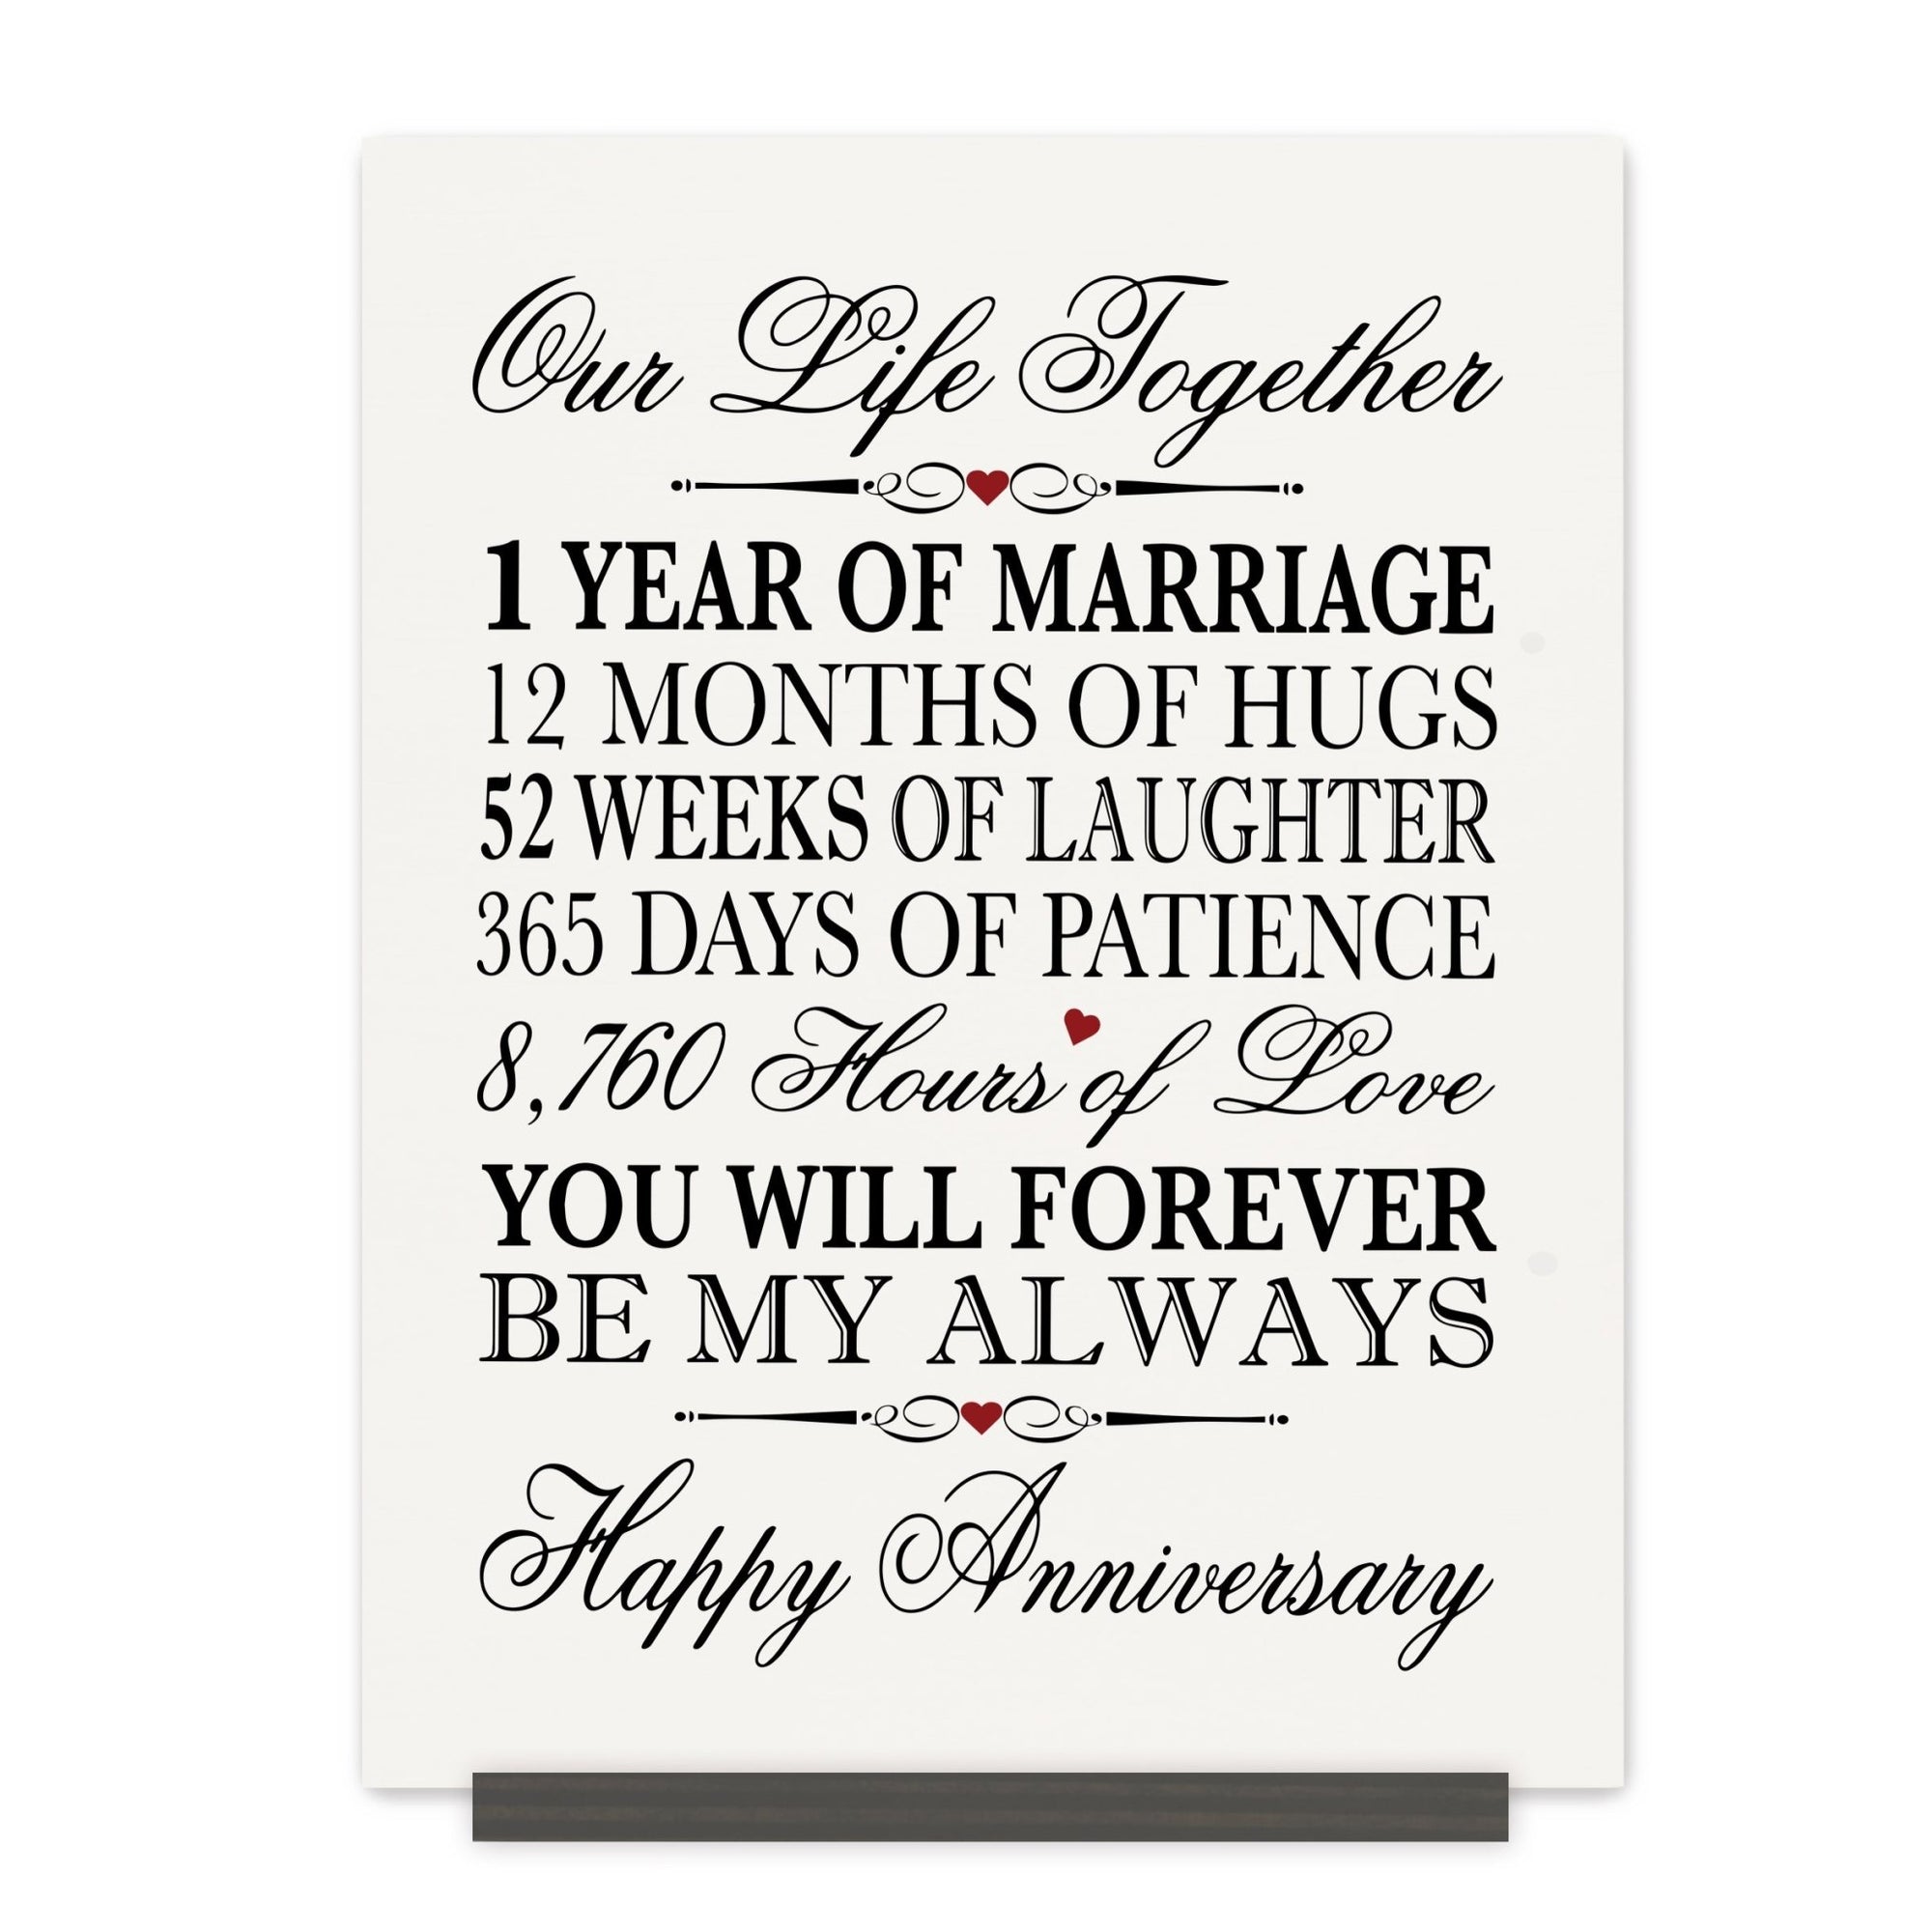 1st Wedding Anniversary Wall Plaque - Our Life Together - LifeSong Milestones